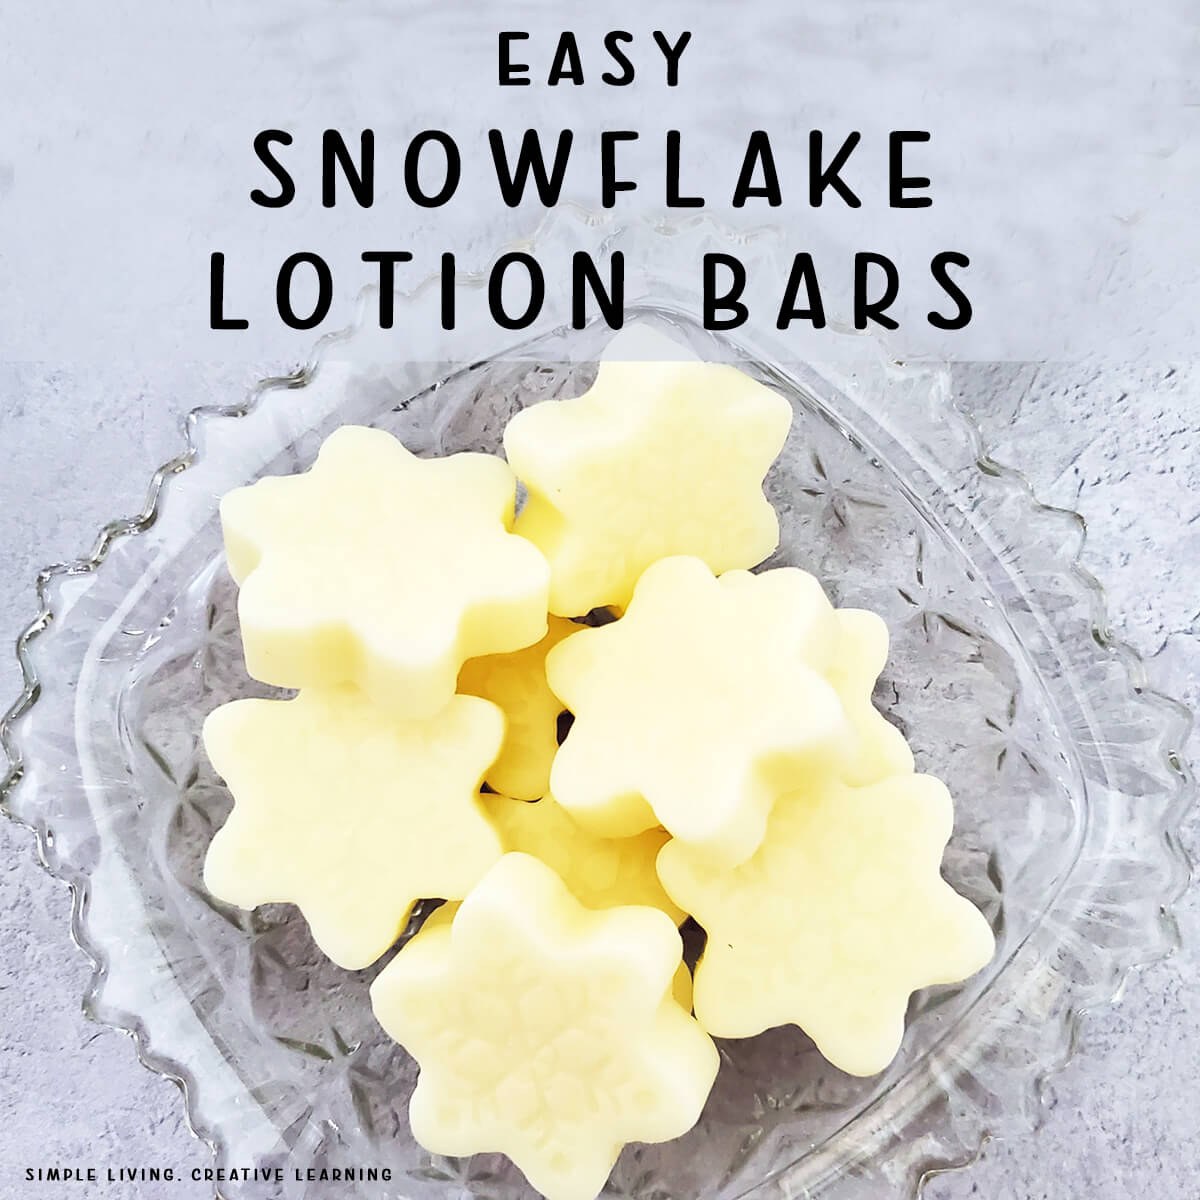 Snowflake Lotion Bars in a glass bowl